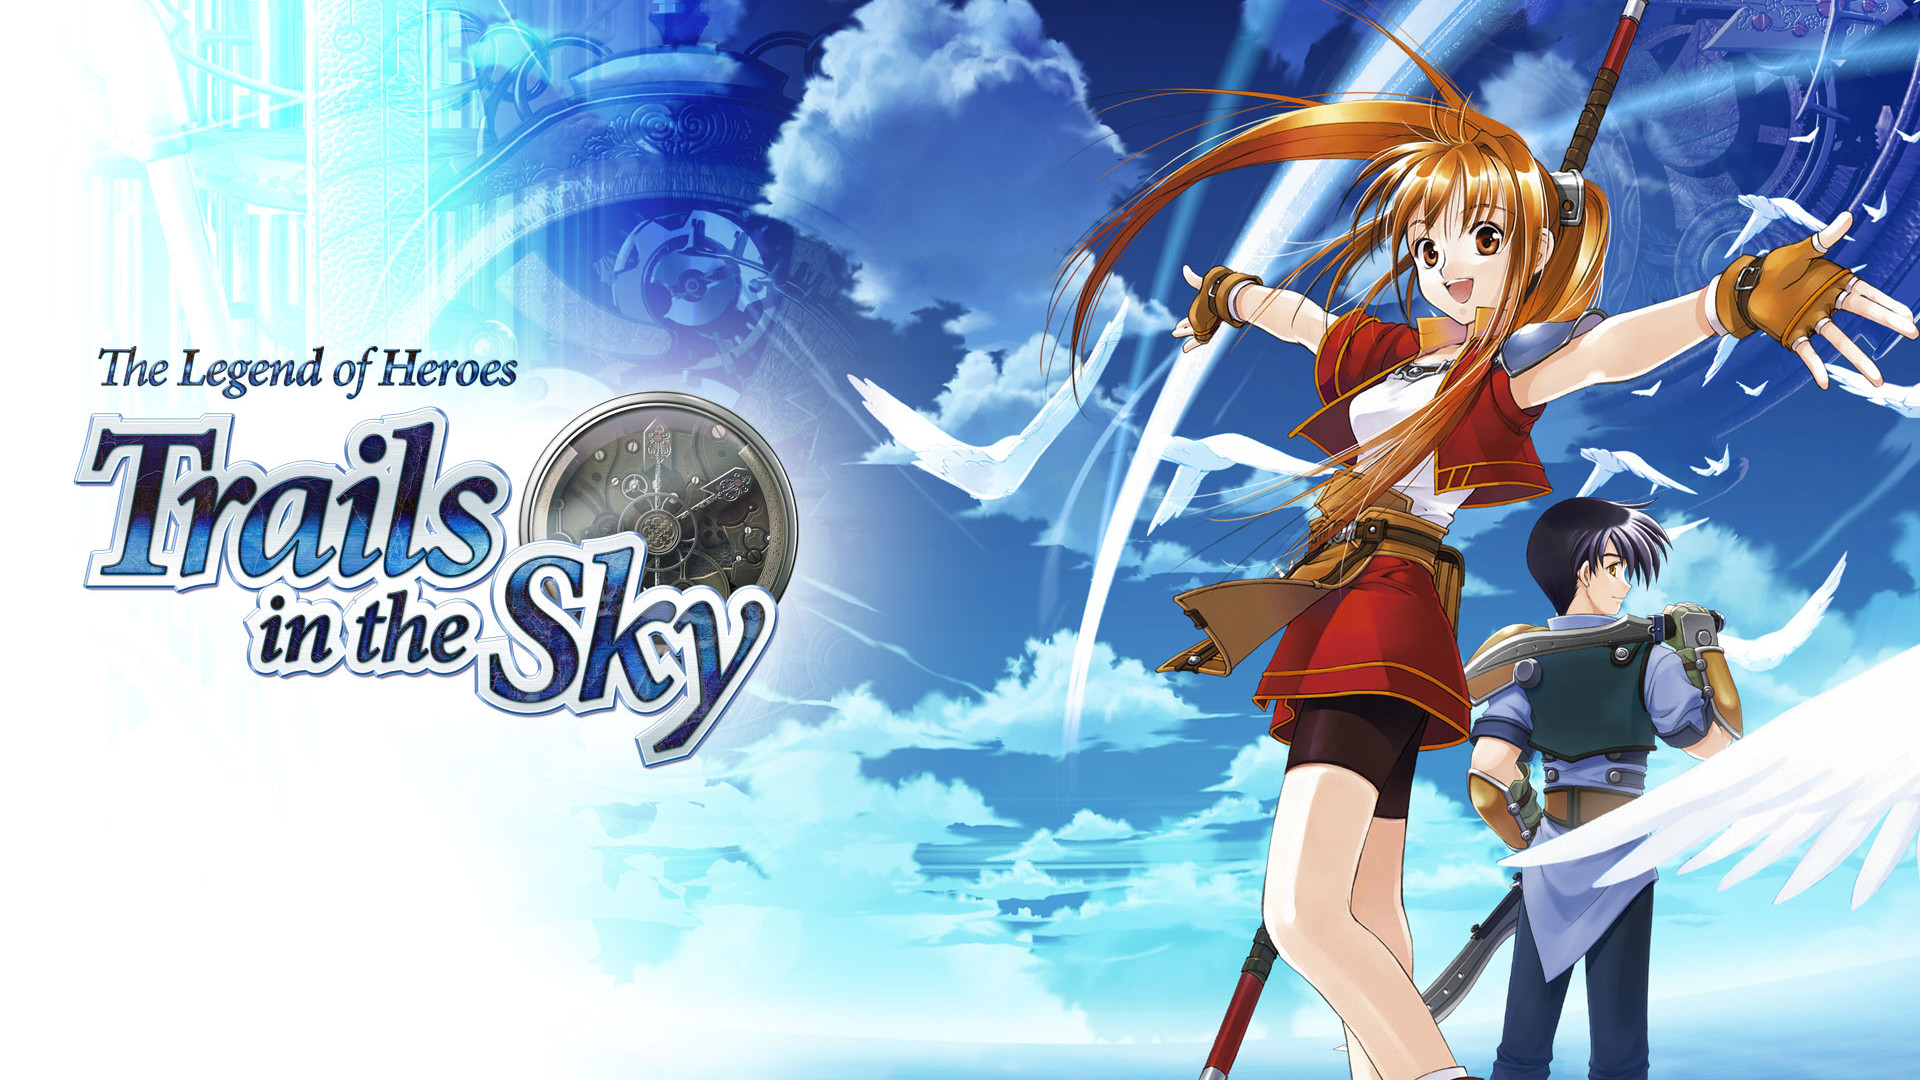 The Legend of Heroes: Trails in the Sky FC